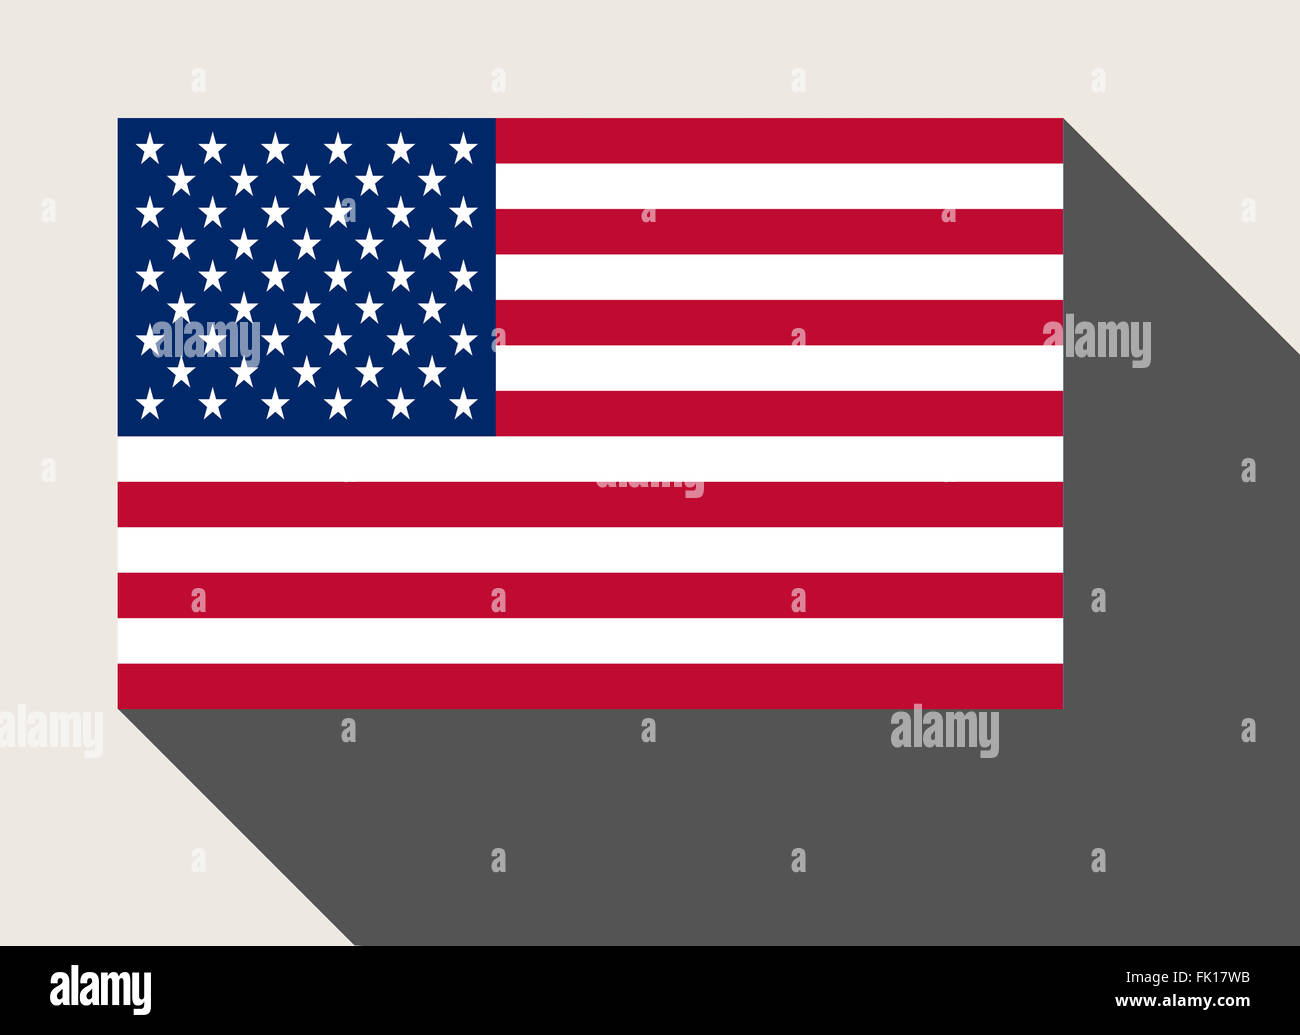 United States of America flag in flat web design style. Stock Photo